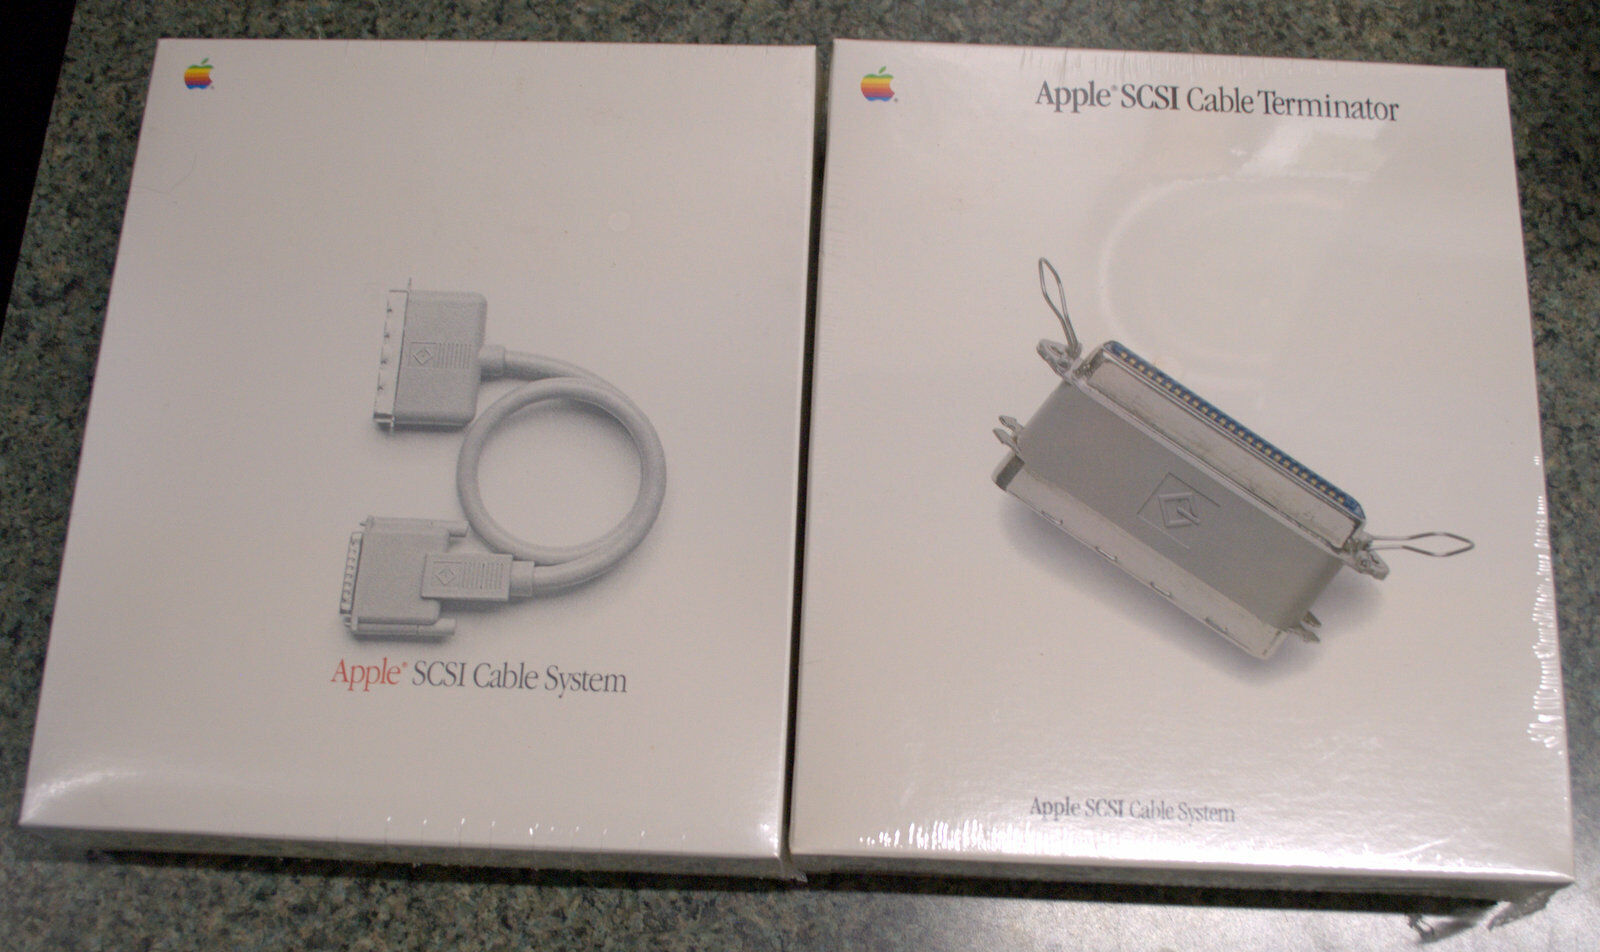 Apple SCSI Cable System w/Terminator New in Box #3- ships worldwide